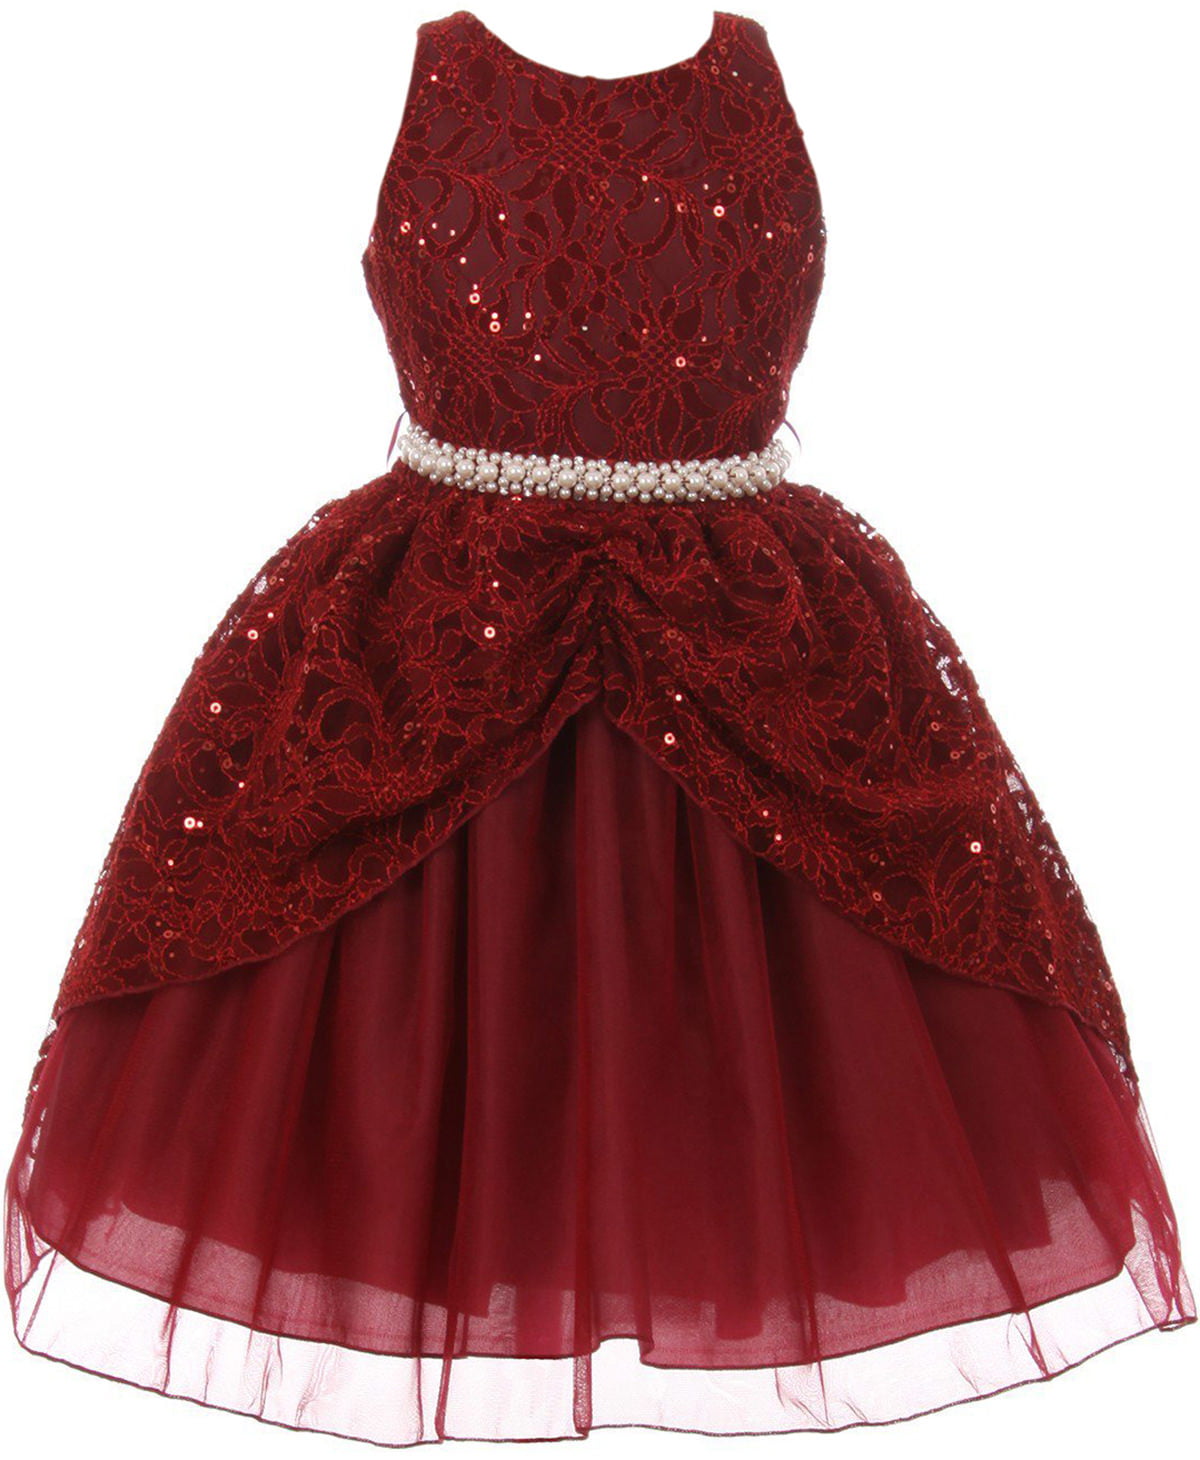 Red Flower Girls Dress Pageant Wedding Party Baby Rhinestones Christmas Easter 